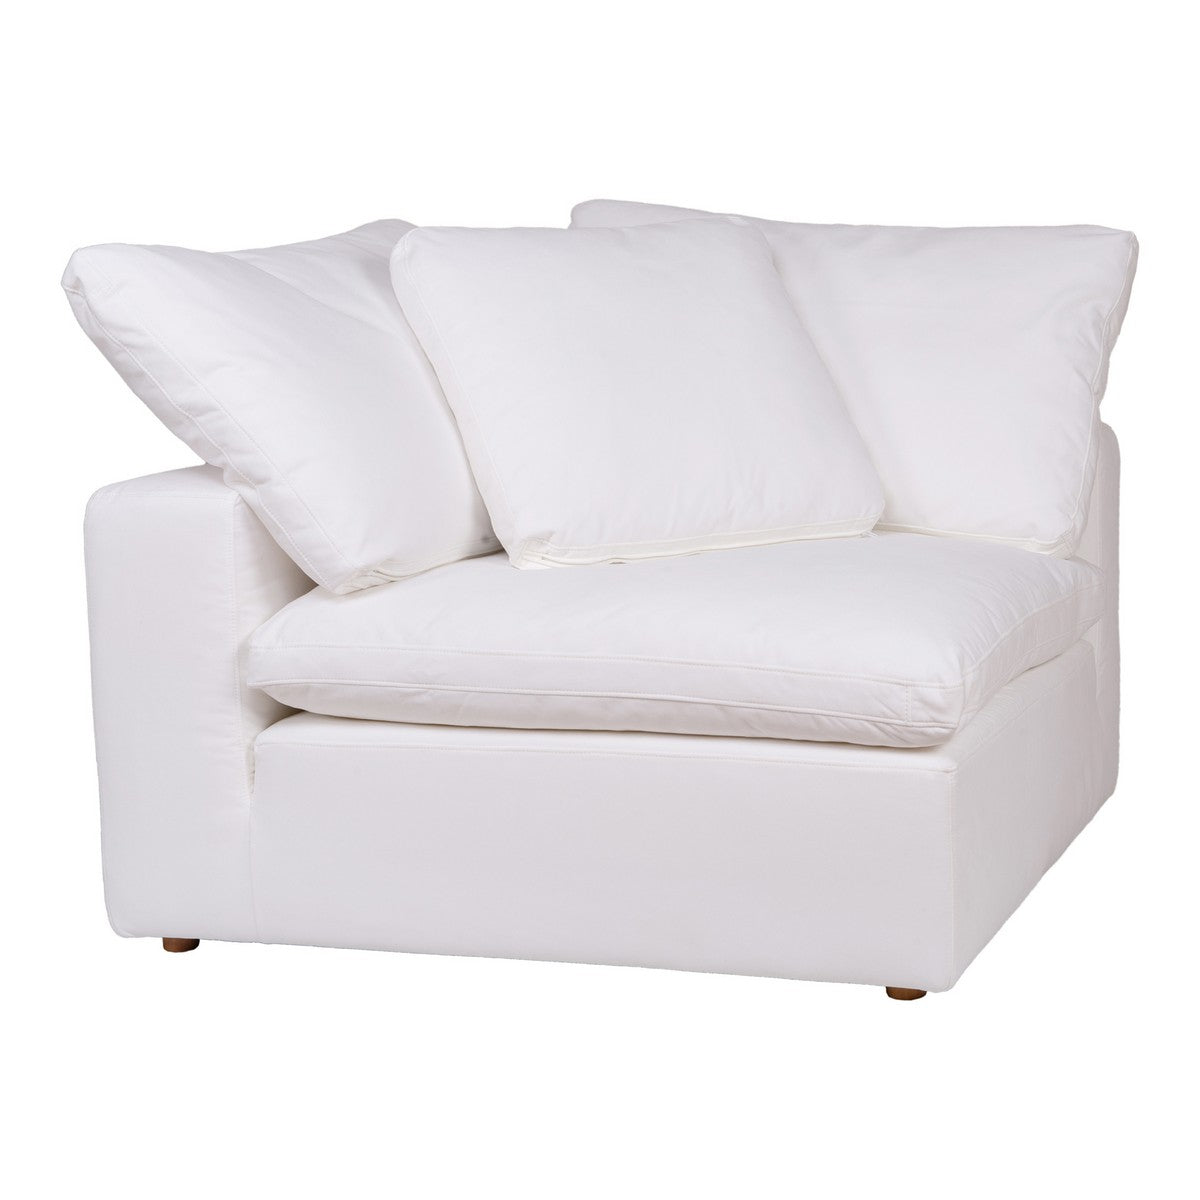 Moe's Home Collection Clay Corner Chair Livesmart Fabric Cream - YJ-1000-05